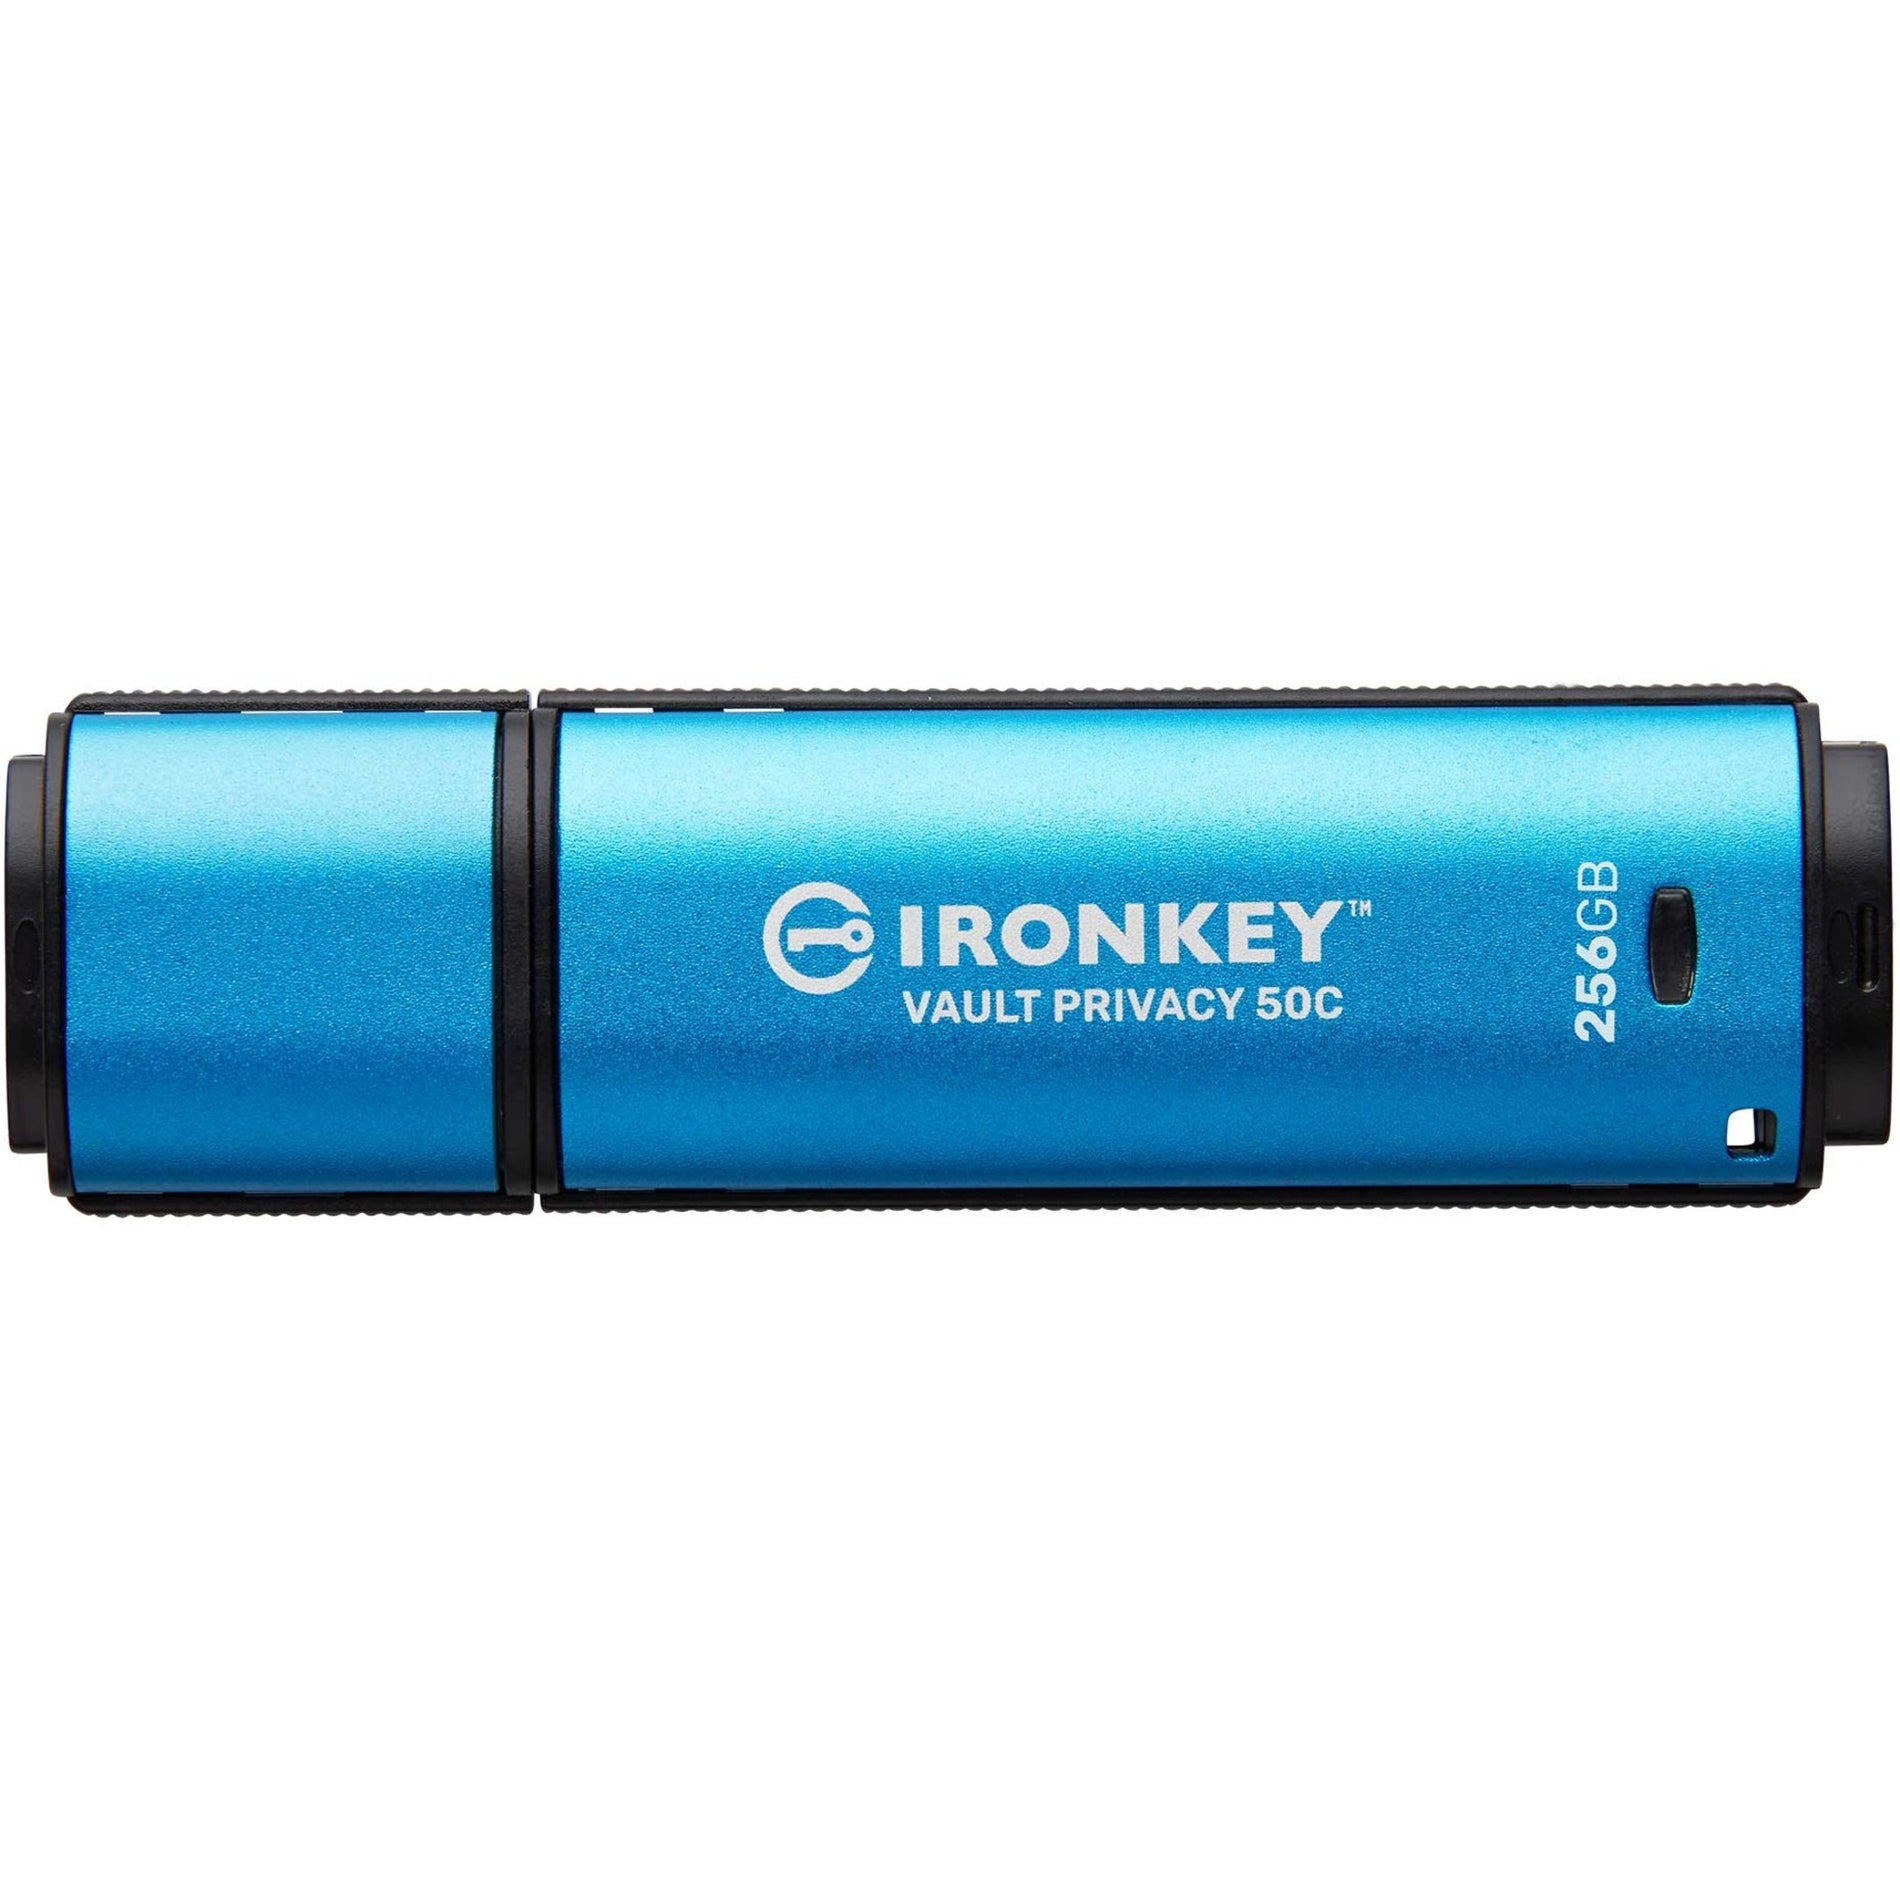 Kingston IKVP50C/256GB Vault Privacy 50 Series 256GB USB 3.2 (Gen 1) Type C Flash Drive, Water Proof, Password Protection, Read-only Mode, Admin and User Mode